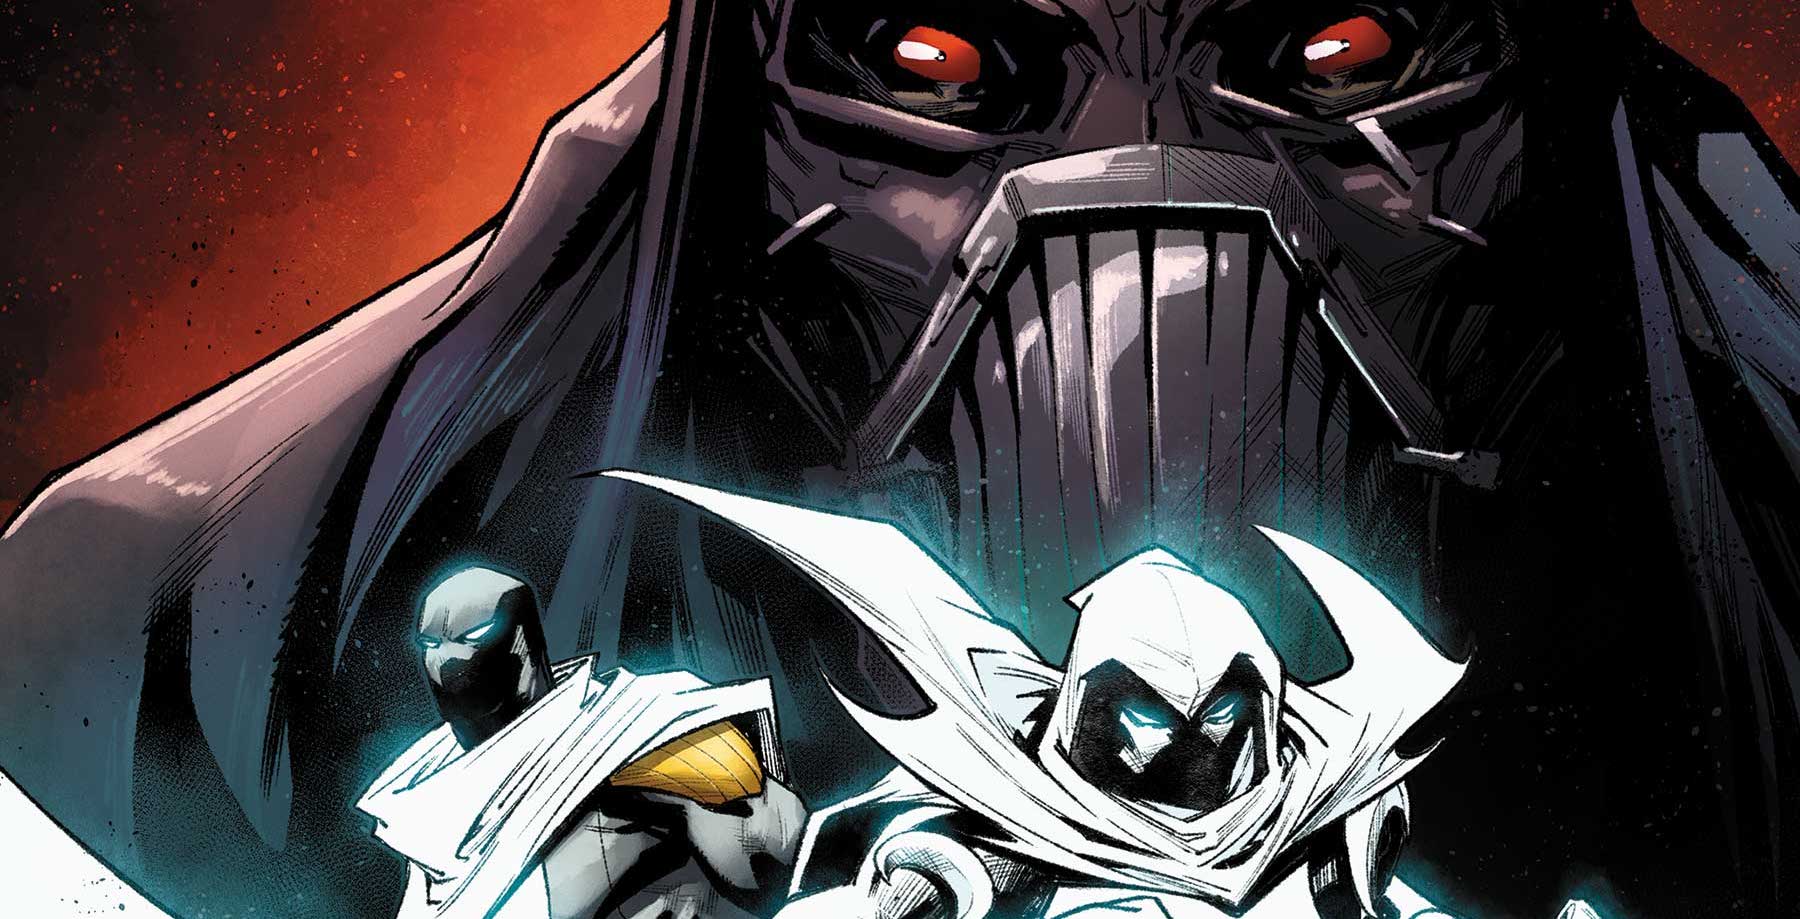 The death of Moon Knight begins October 18th